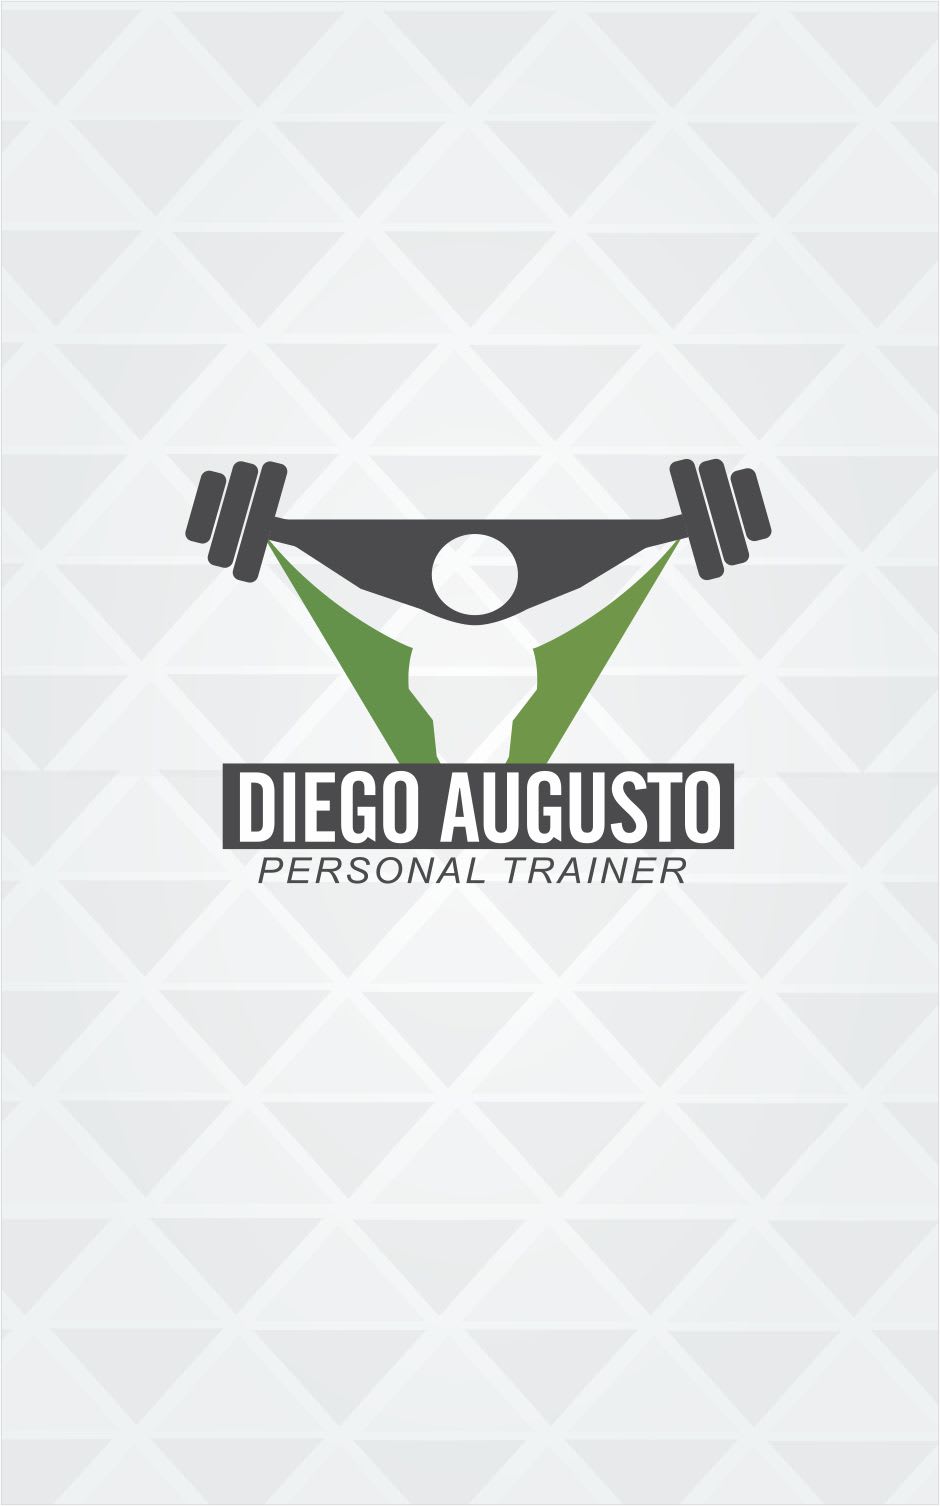 Diego Augusto Personal Trainer